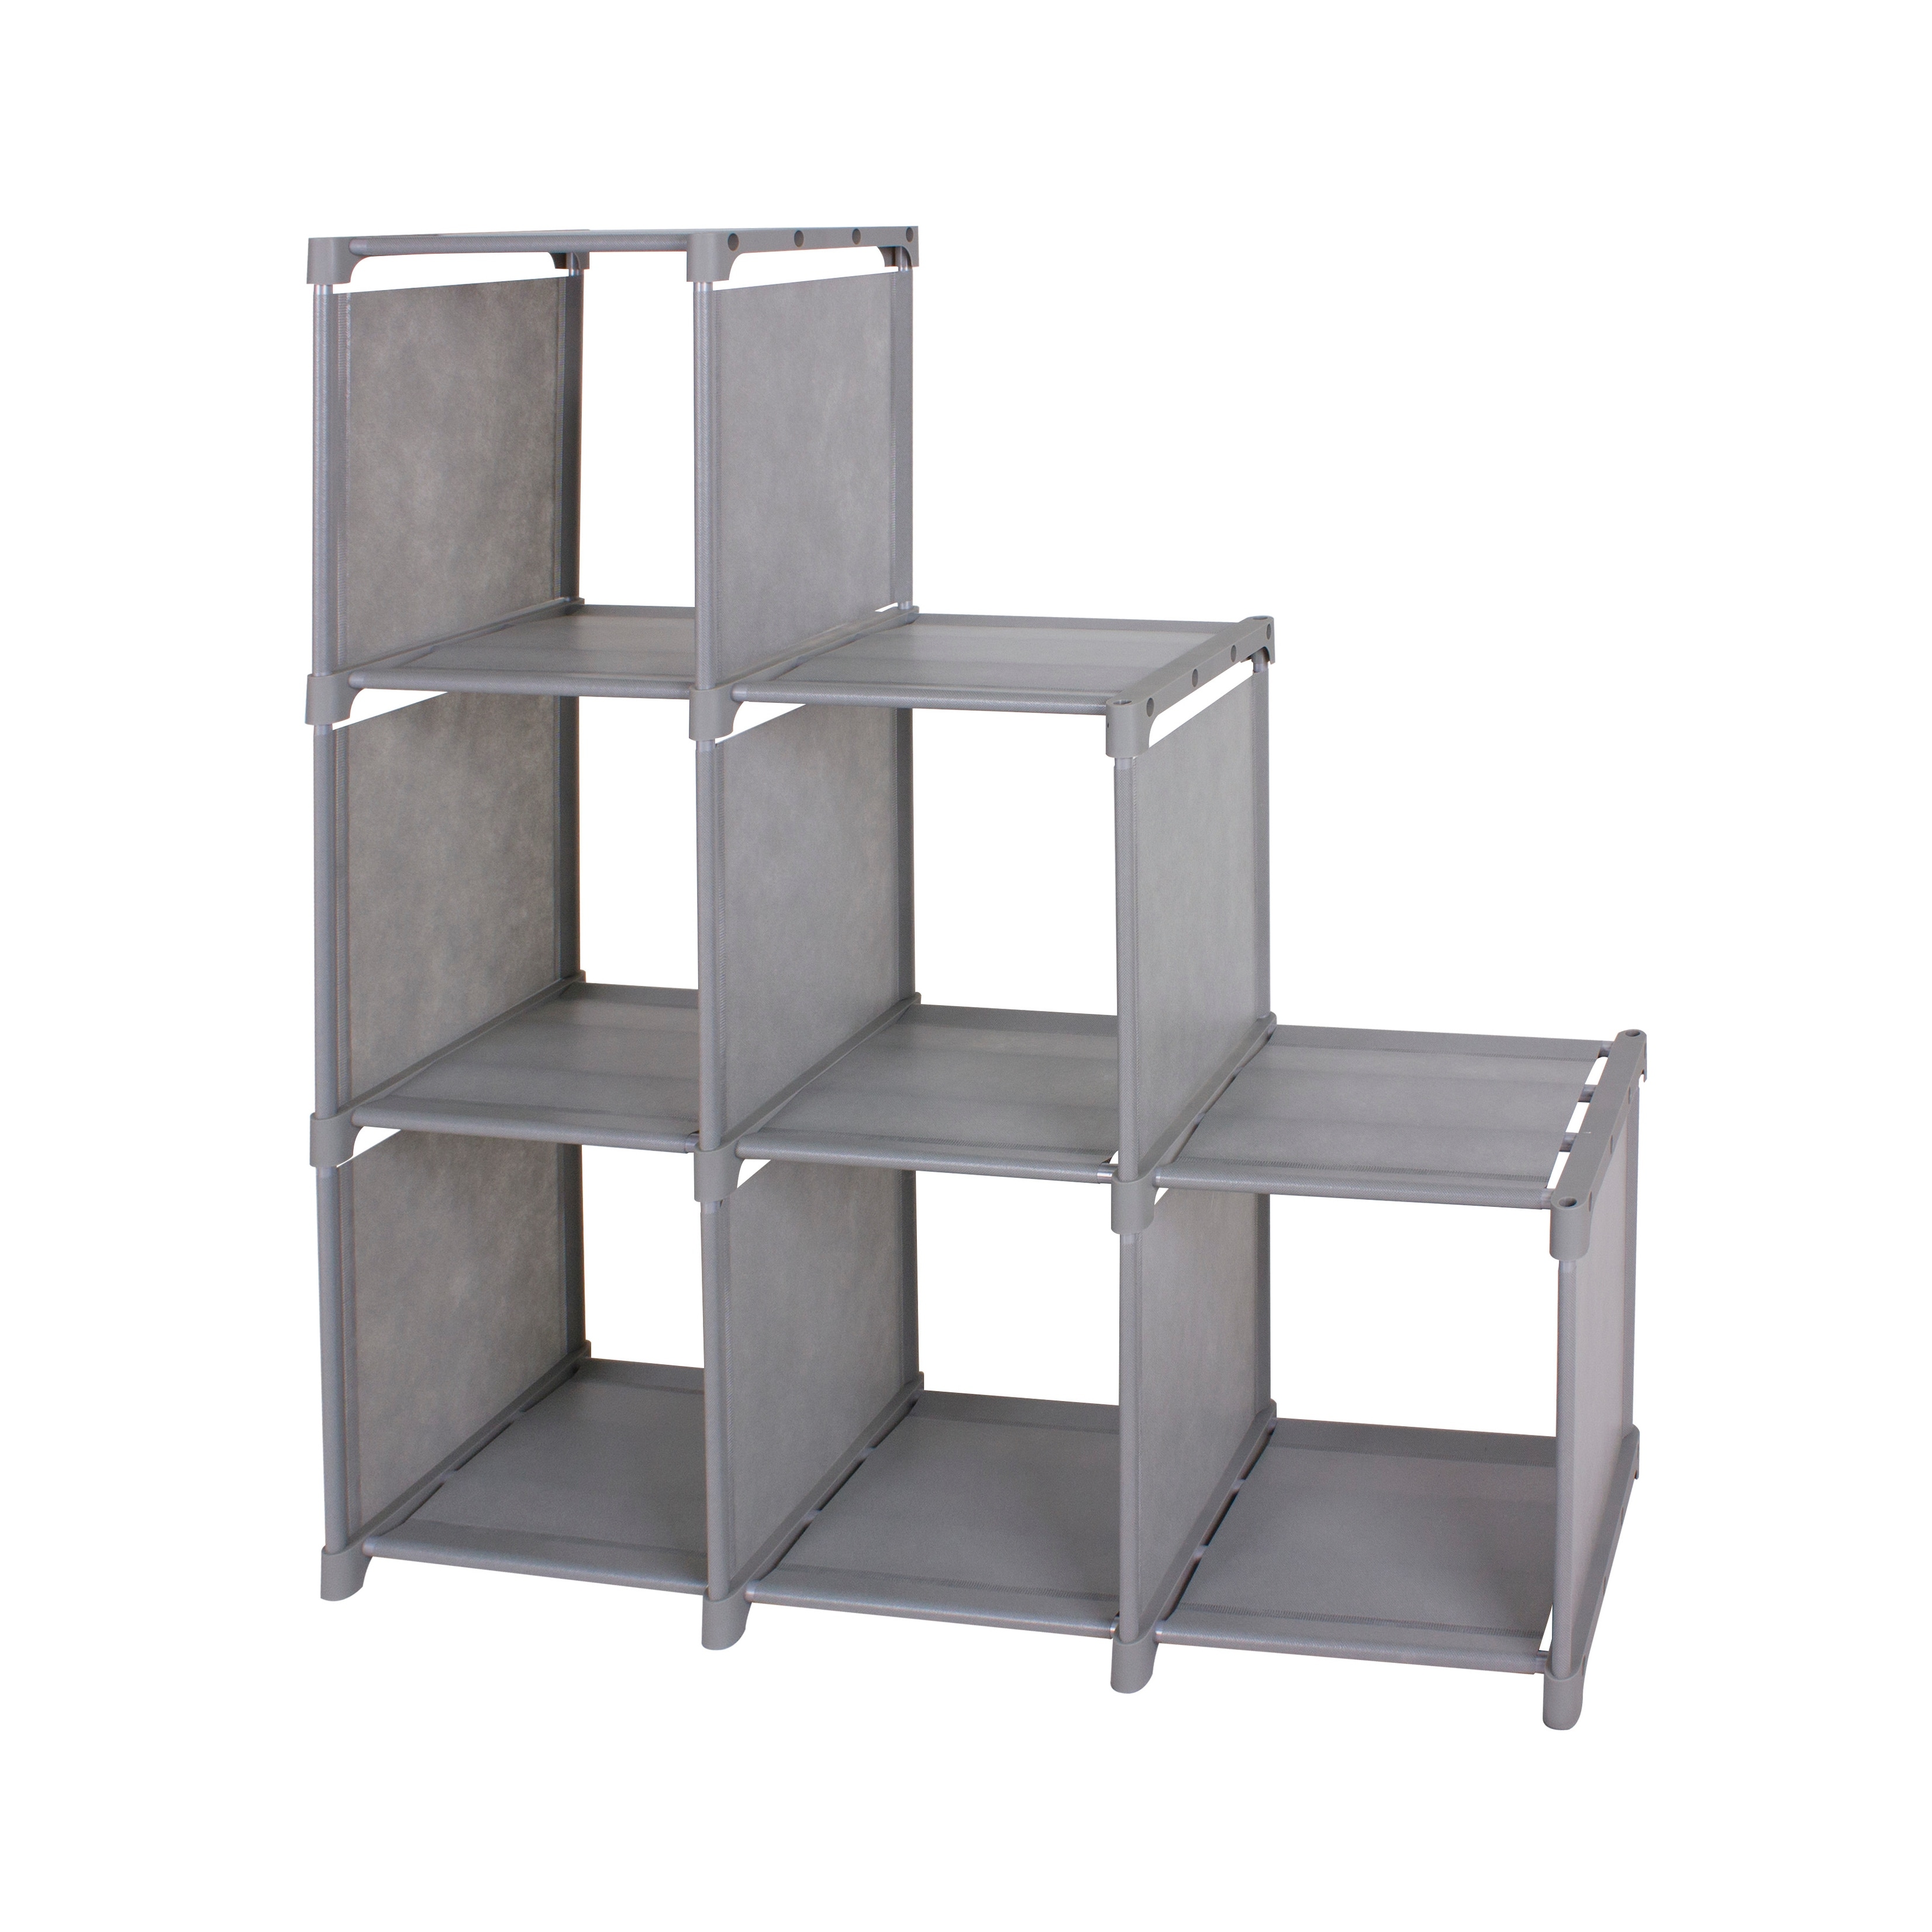 https://ak1.ostkcdn.com/images/products/is/images/direct/dc5225e3852373e7f80dee17699c9faf571fc7ad/Kanstar-3-tier-Storage-Cube-Closet-Organizer-Shelf-6-cube-Cabinet-Bookcase-Gray.jpg